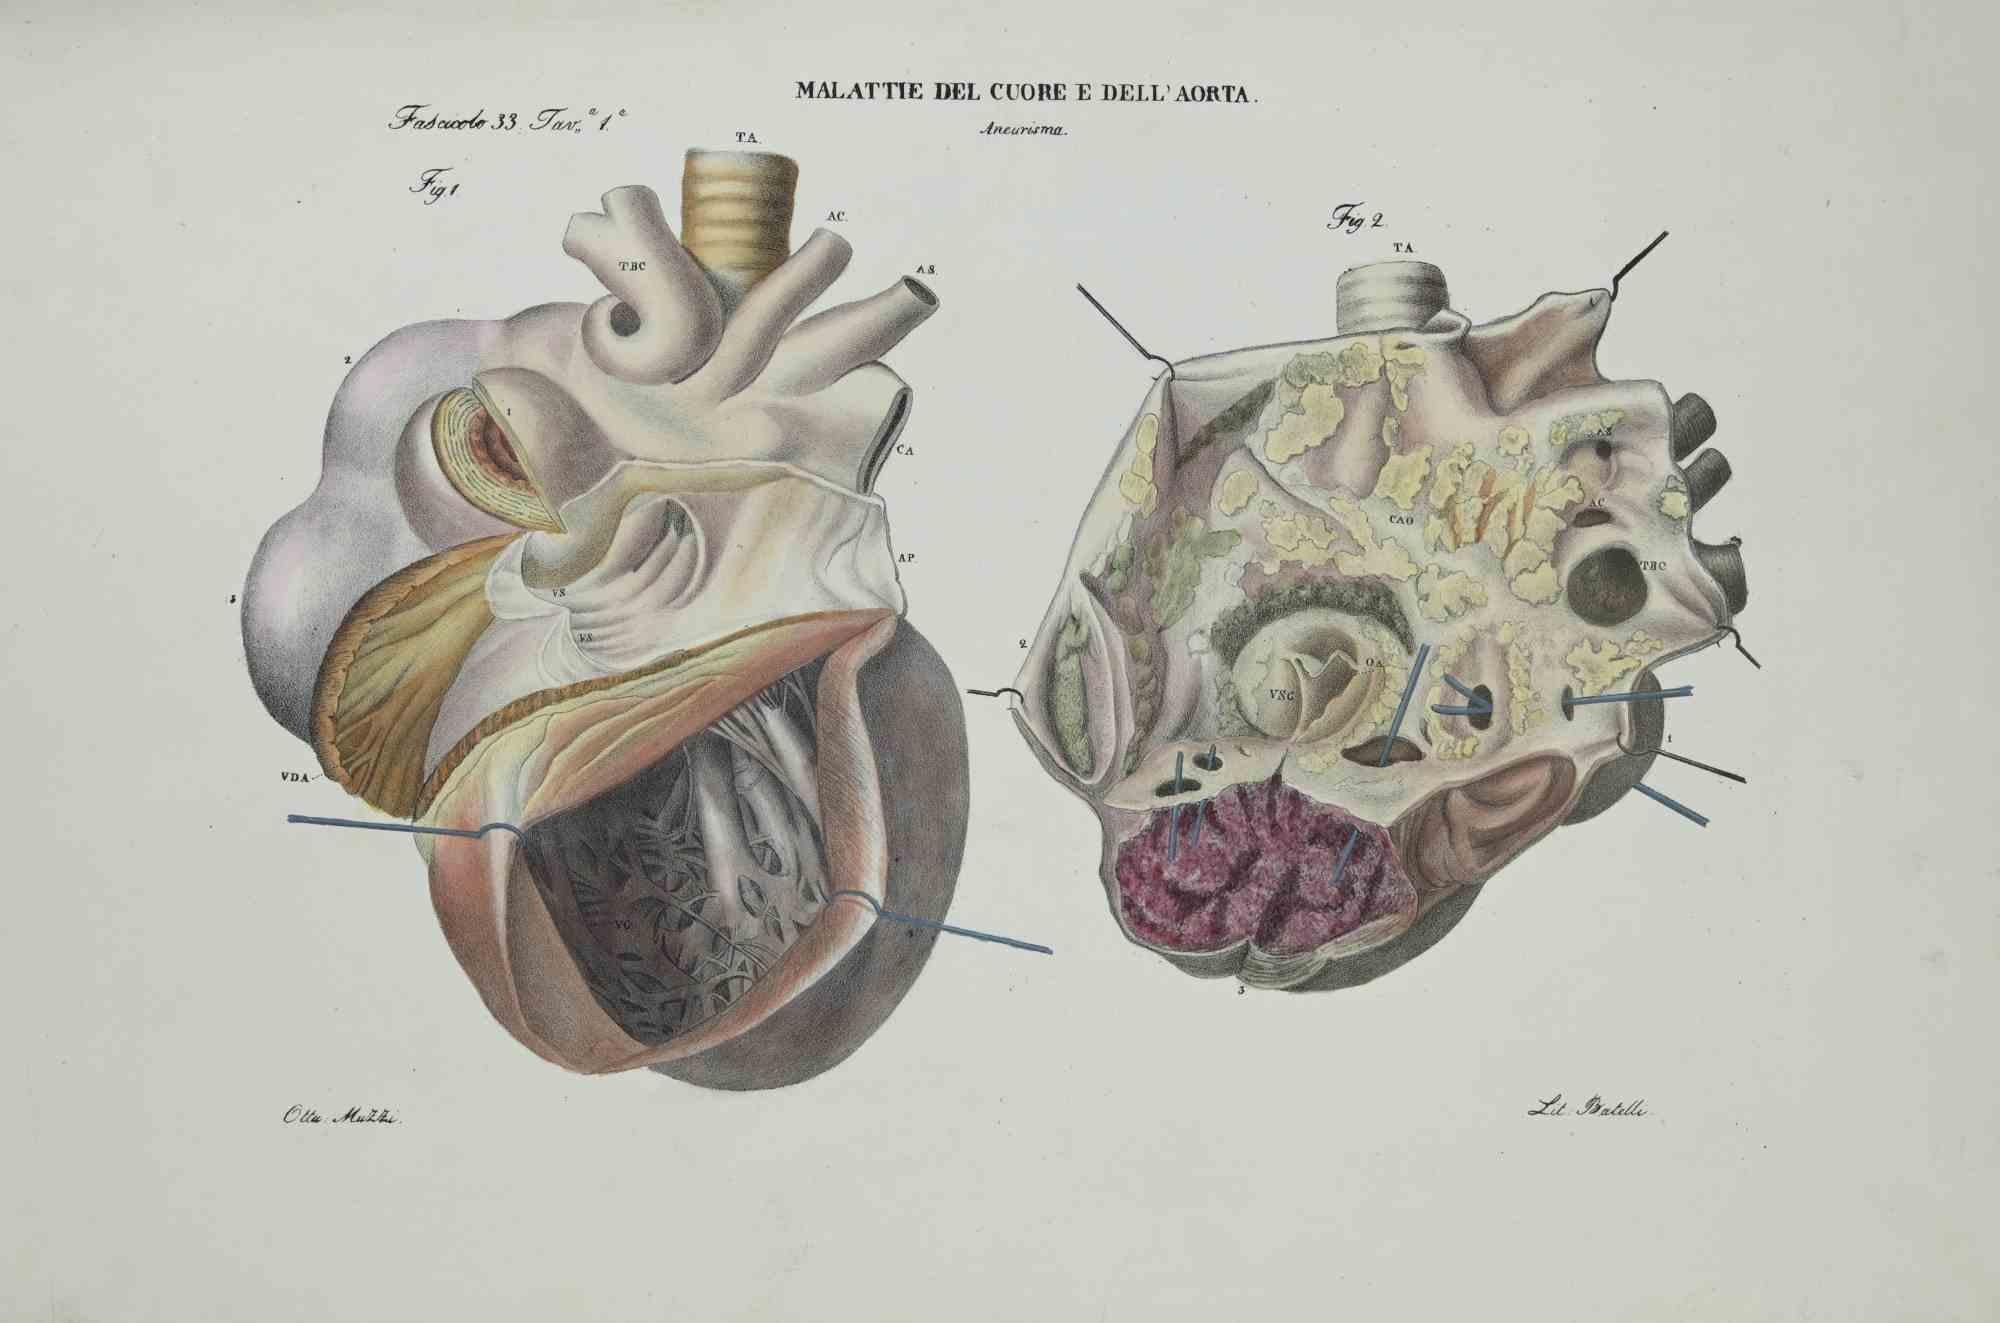 Heart Diseases is a lithograph hand colored by Ottavio Muzzi for the edition of Antoine Chazal,Human Anatomy, Printers Batelli and Ridolfi, realized in 1843.

Signed on plate on the lower left margin.